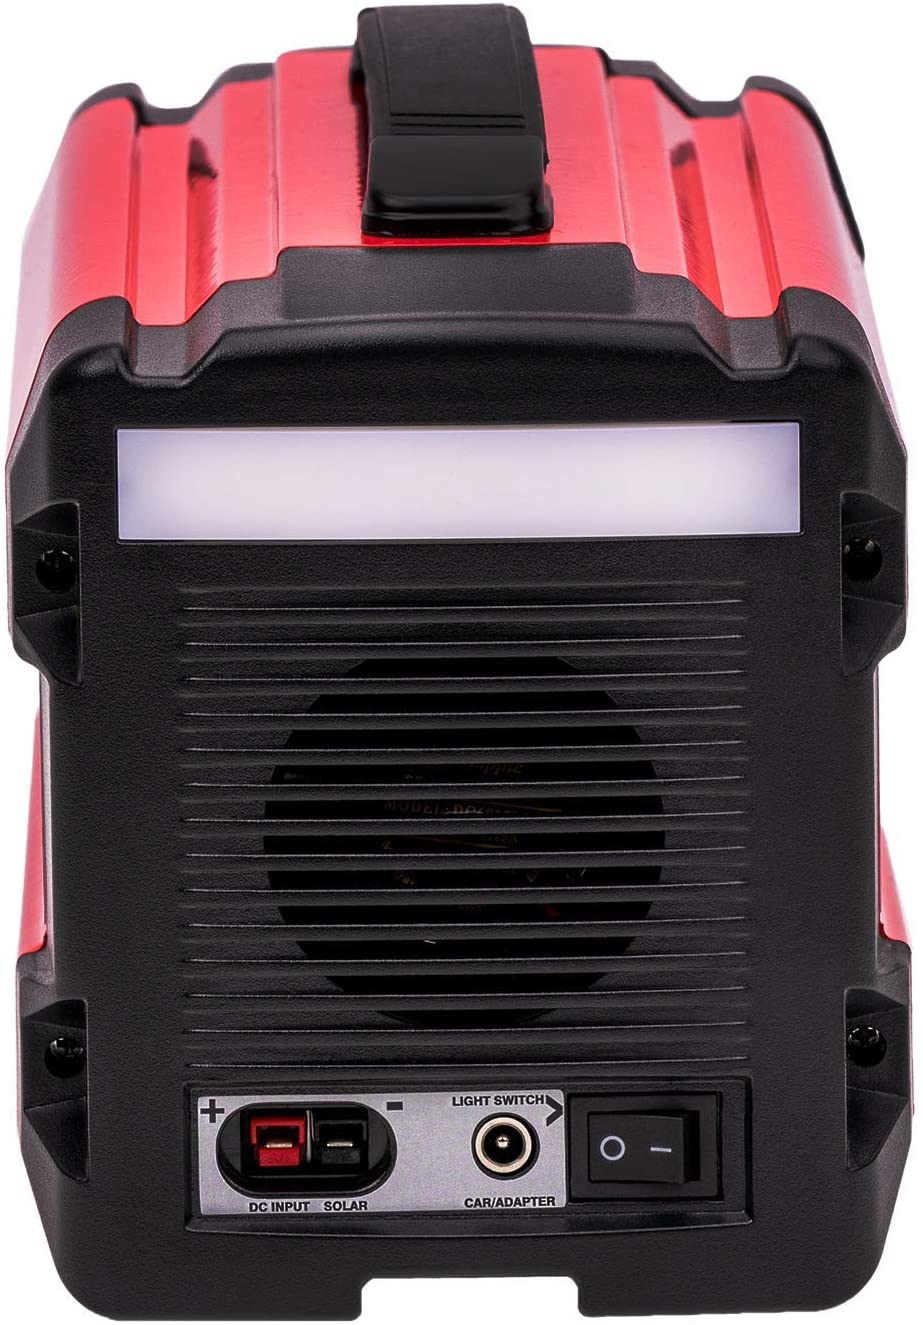 A-iPower PPS300L Portable Power Station 278 Watt Hour Battery Backup Inverter Generator Small Size Great for Camping or Indoor Home Emergency